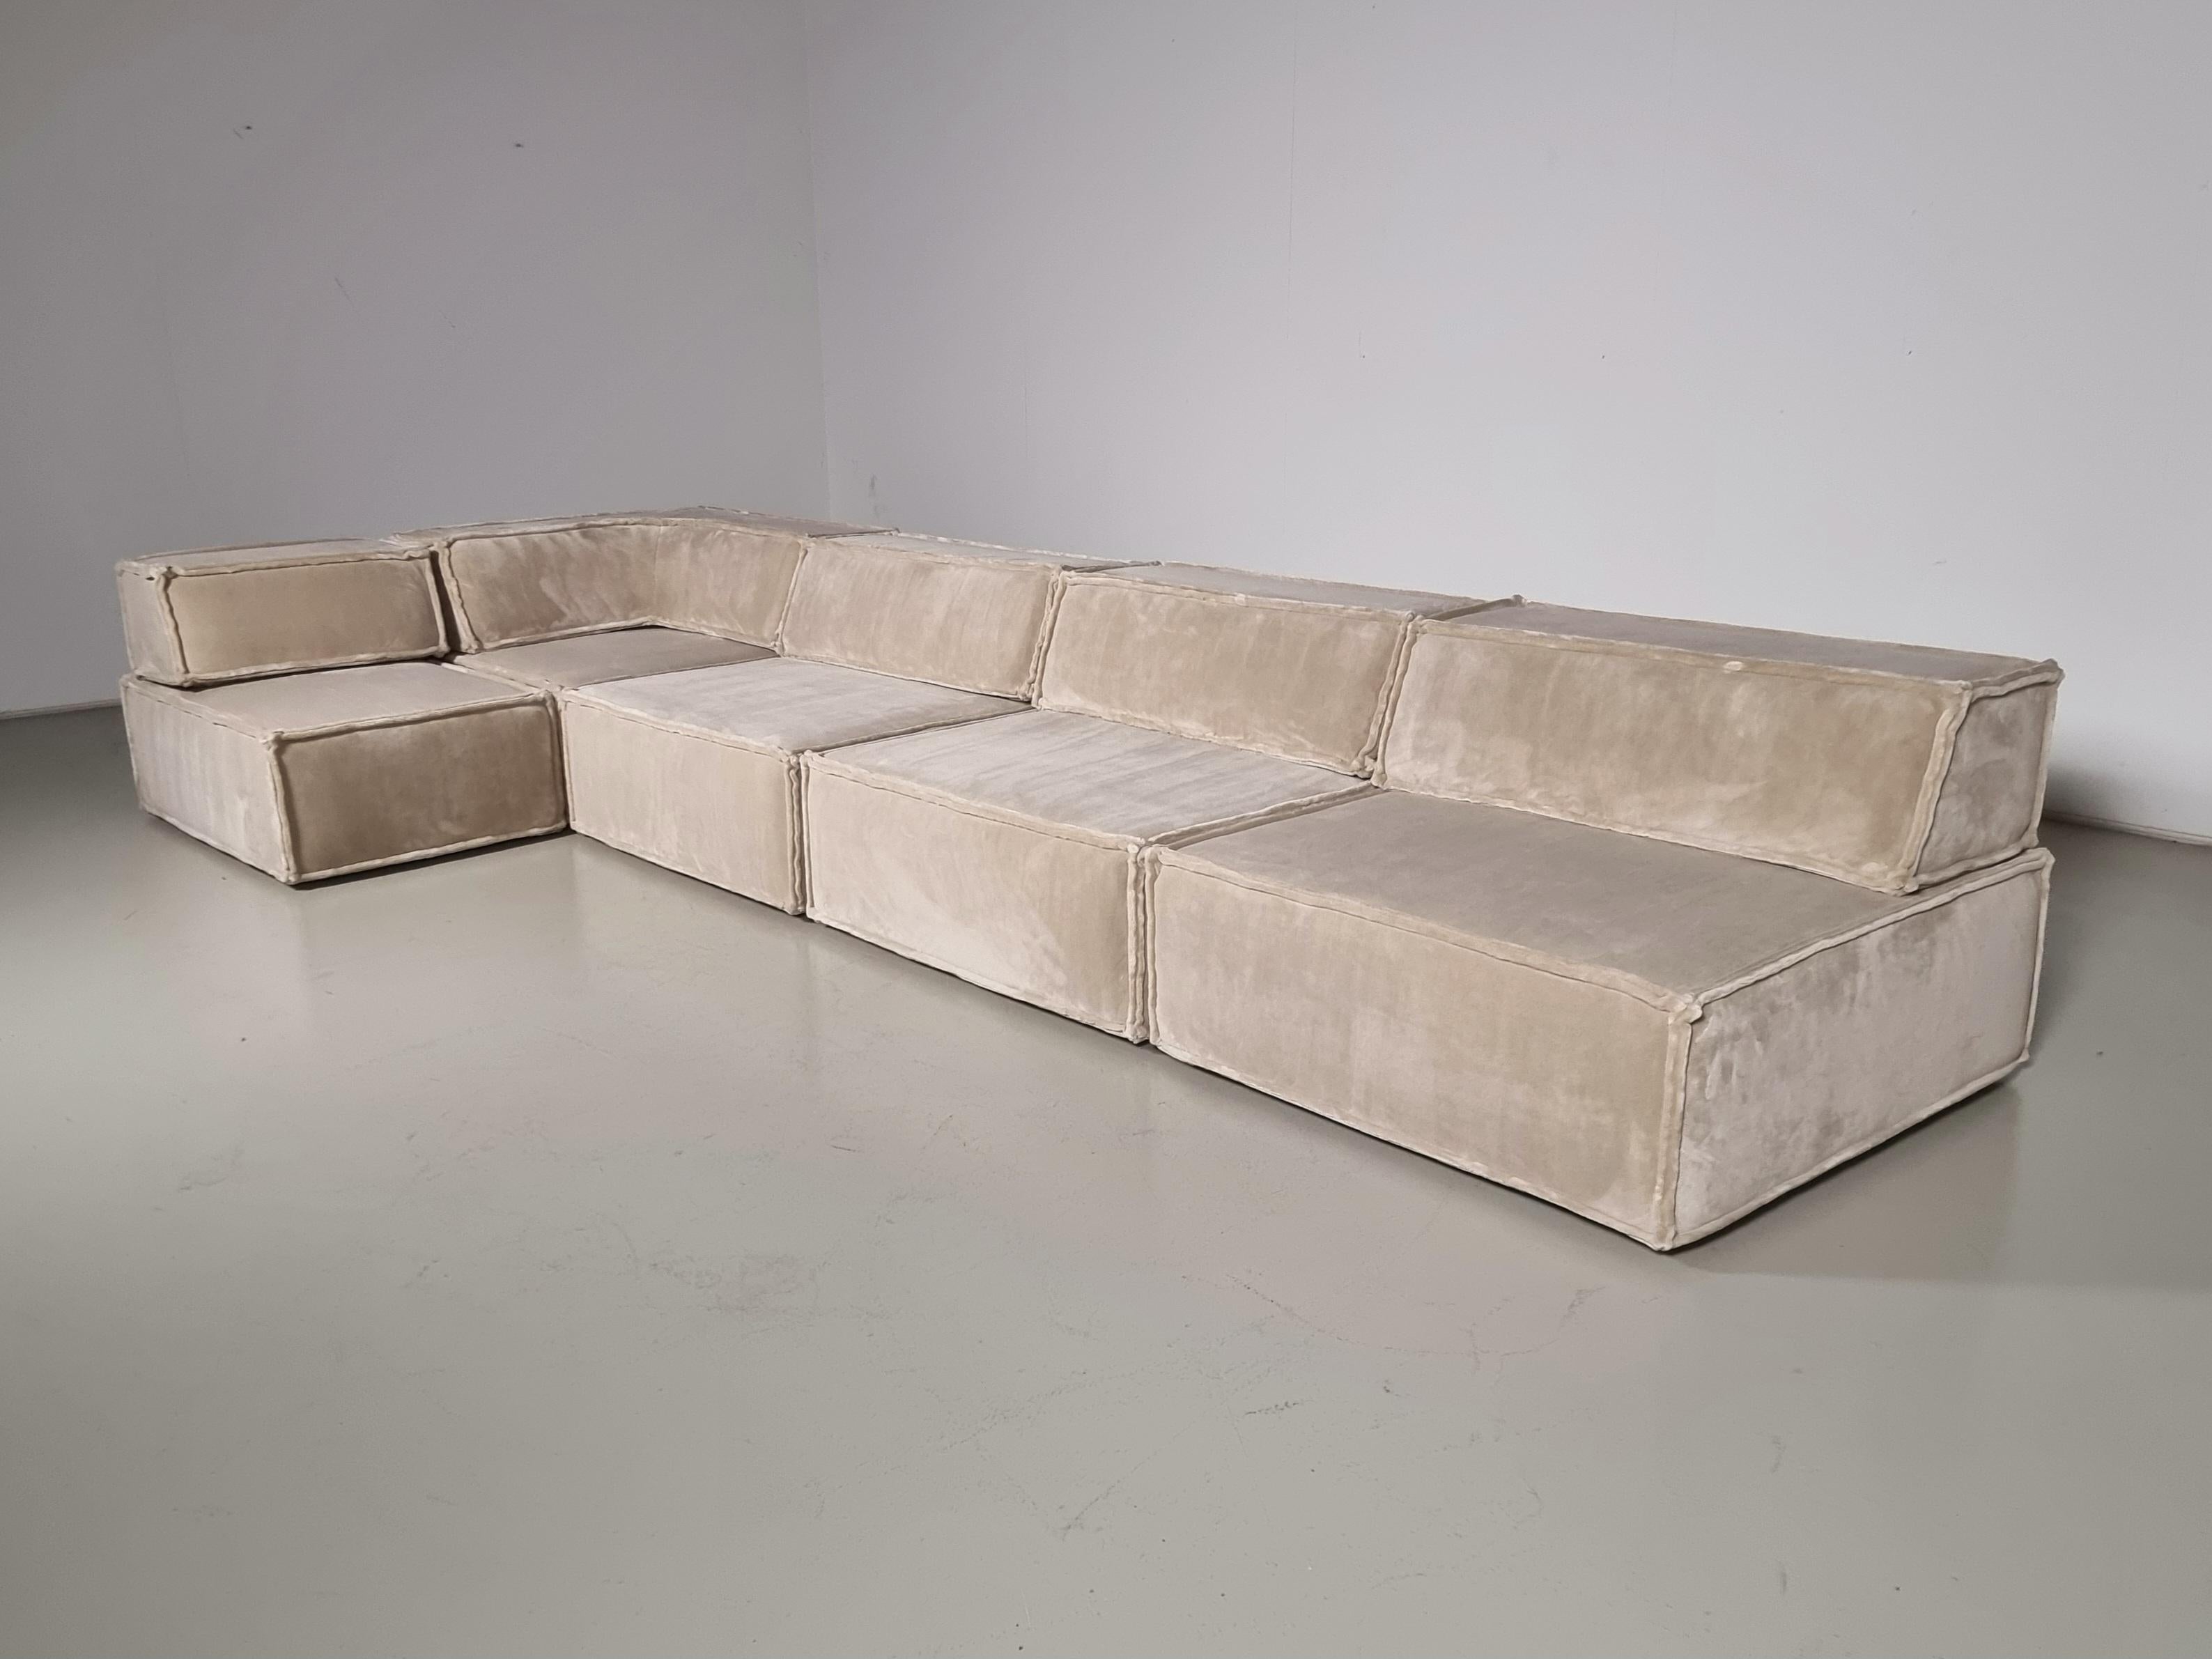 European COR Trio Sofa by Team Form Ag for COR Furniture, Germany, 1970s